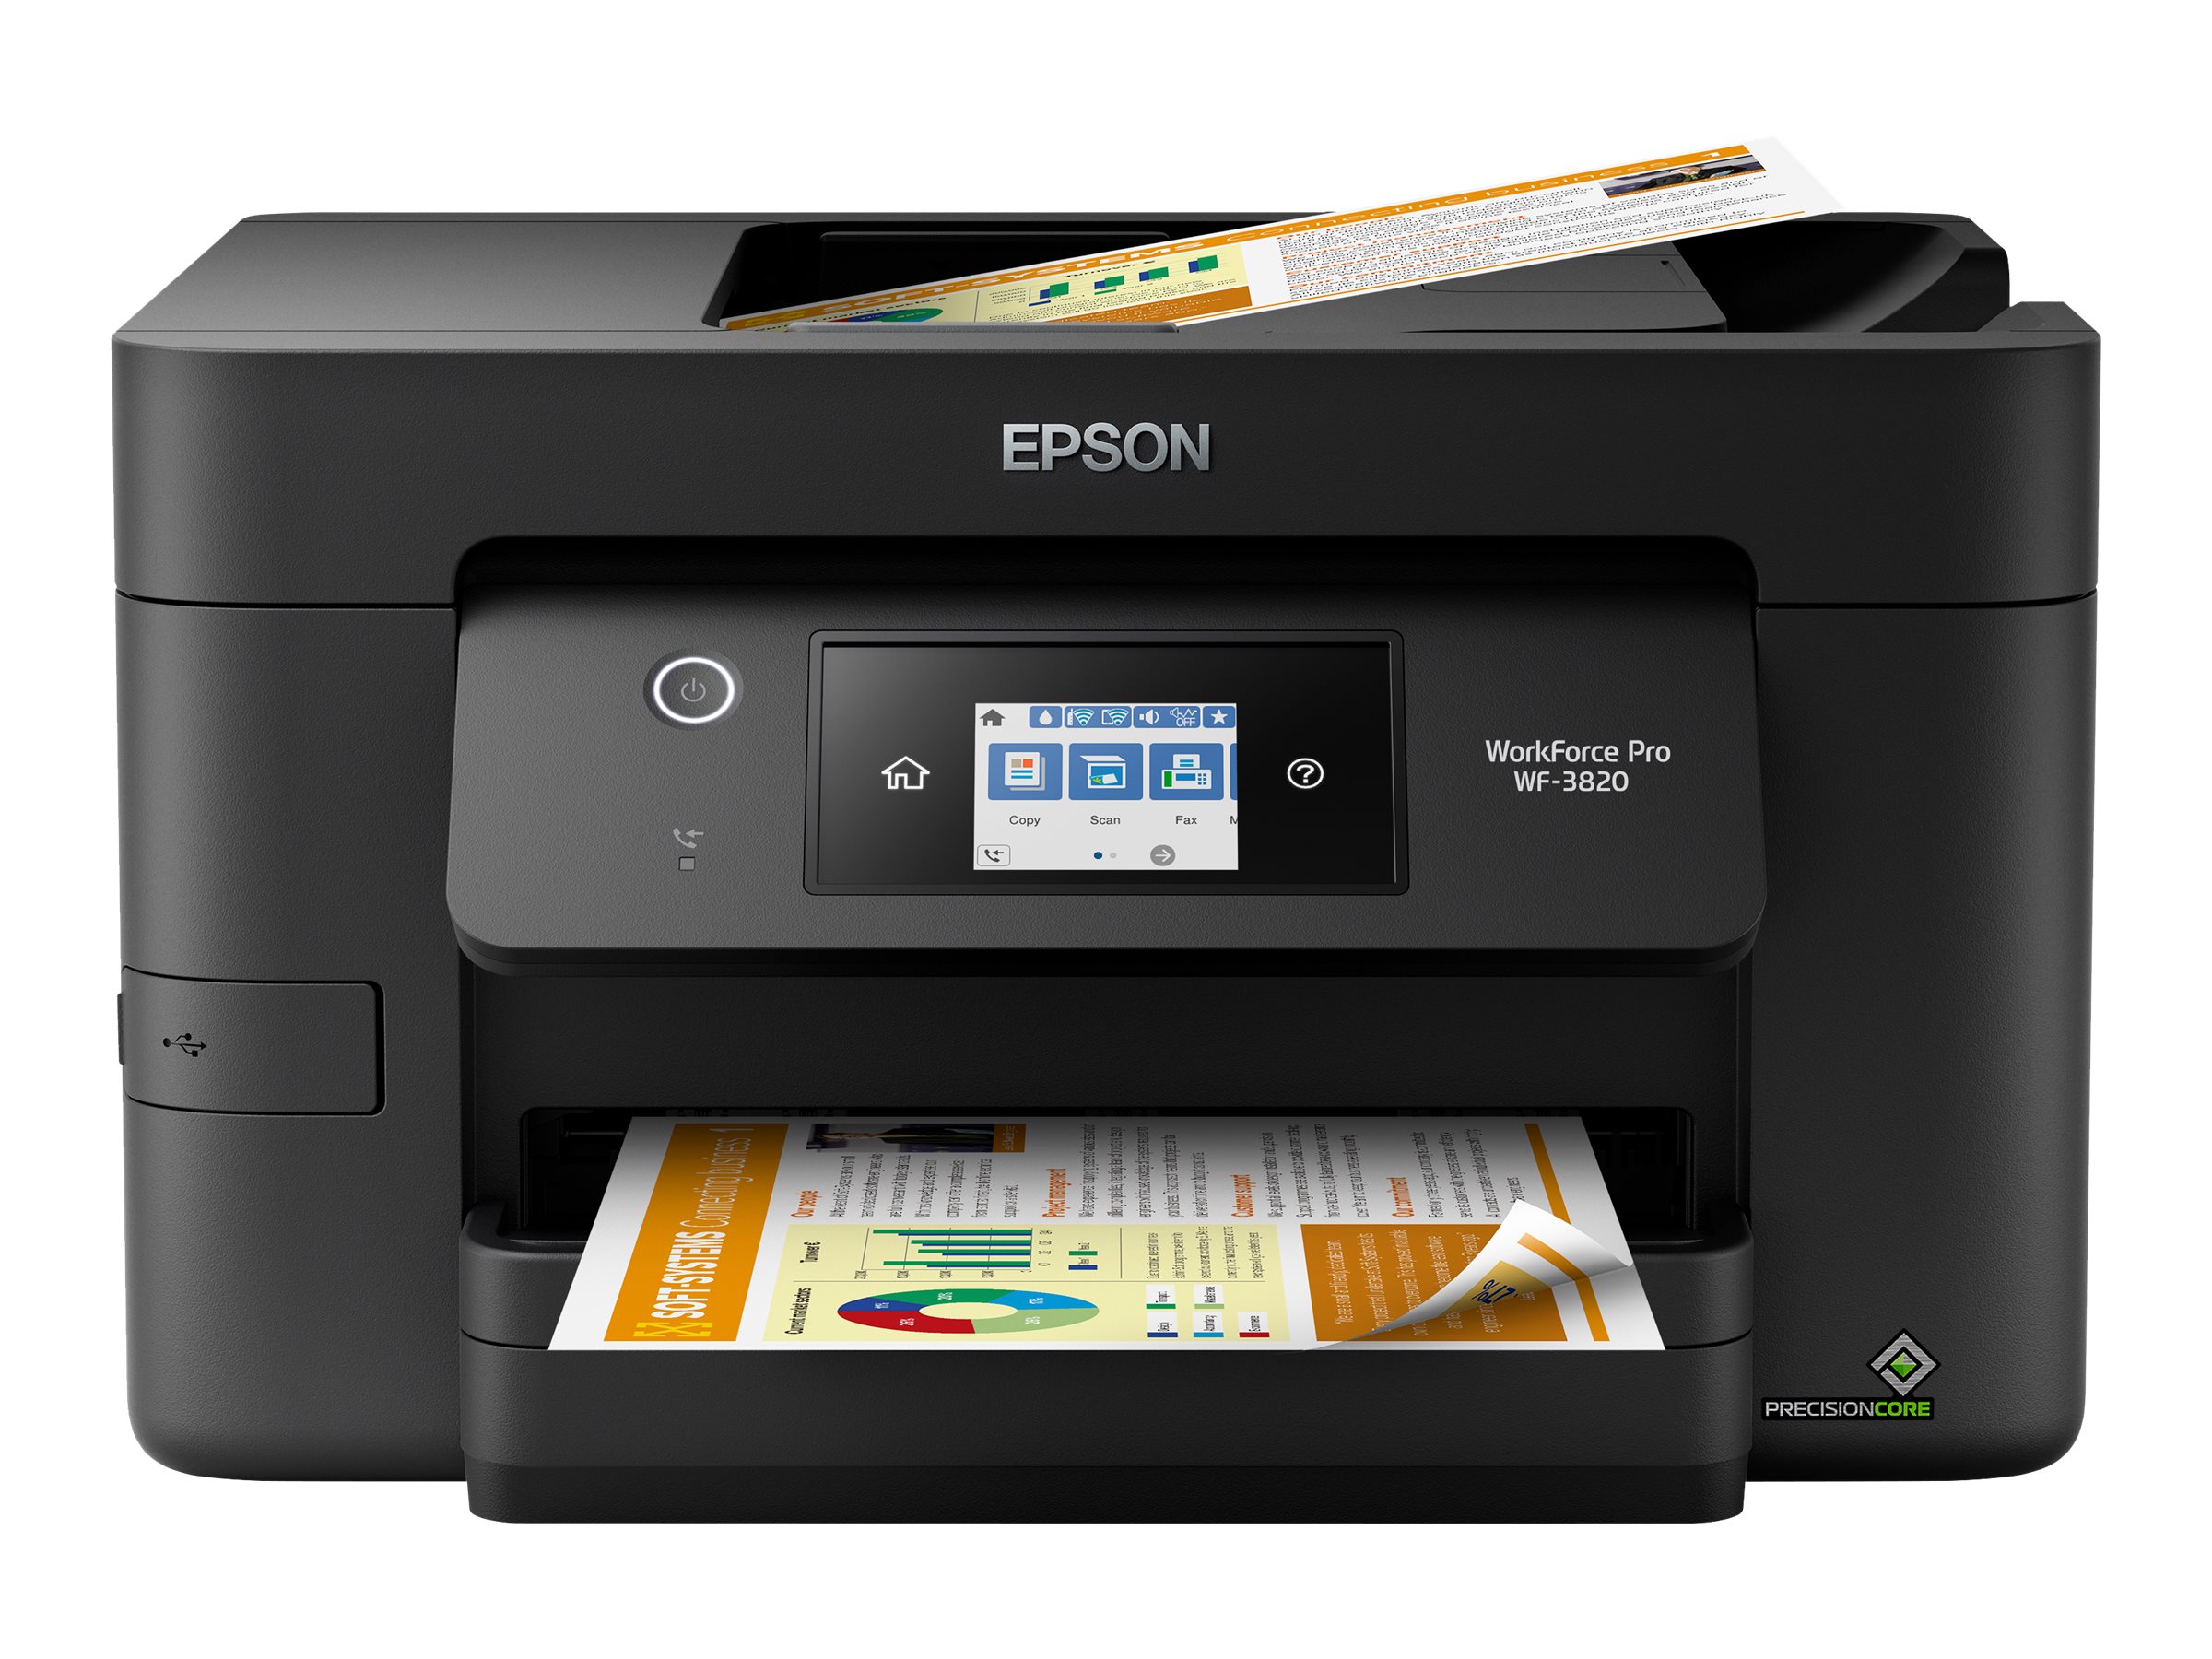 Epson(r) Workforce(r) Pro WF-3820 Wireless Color Inkjet All-in-One Printer, Black Large - image 1 of 6